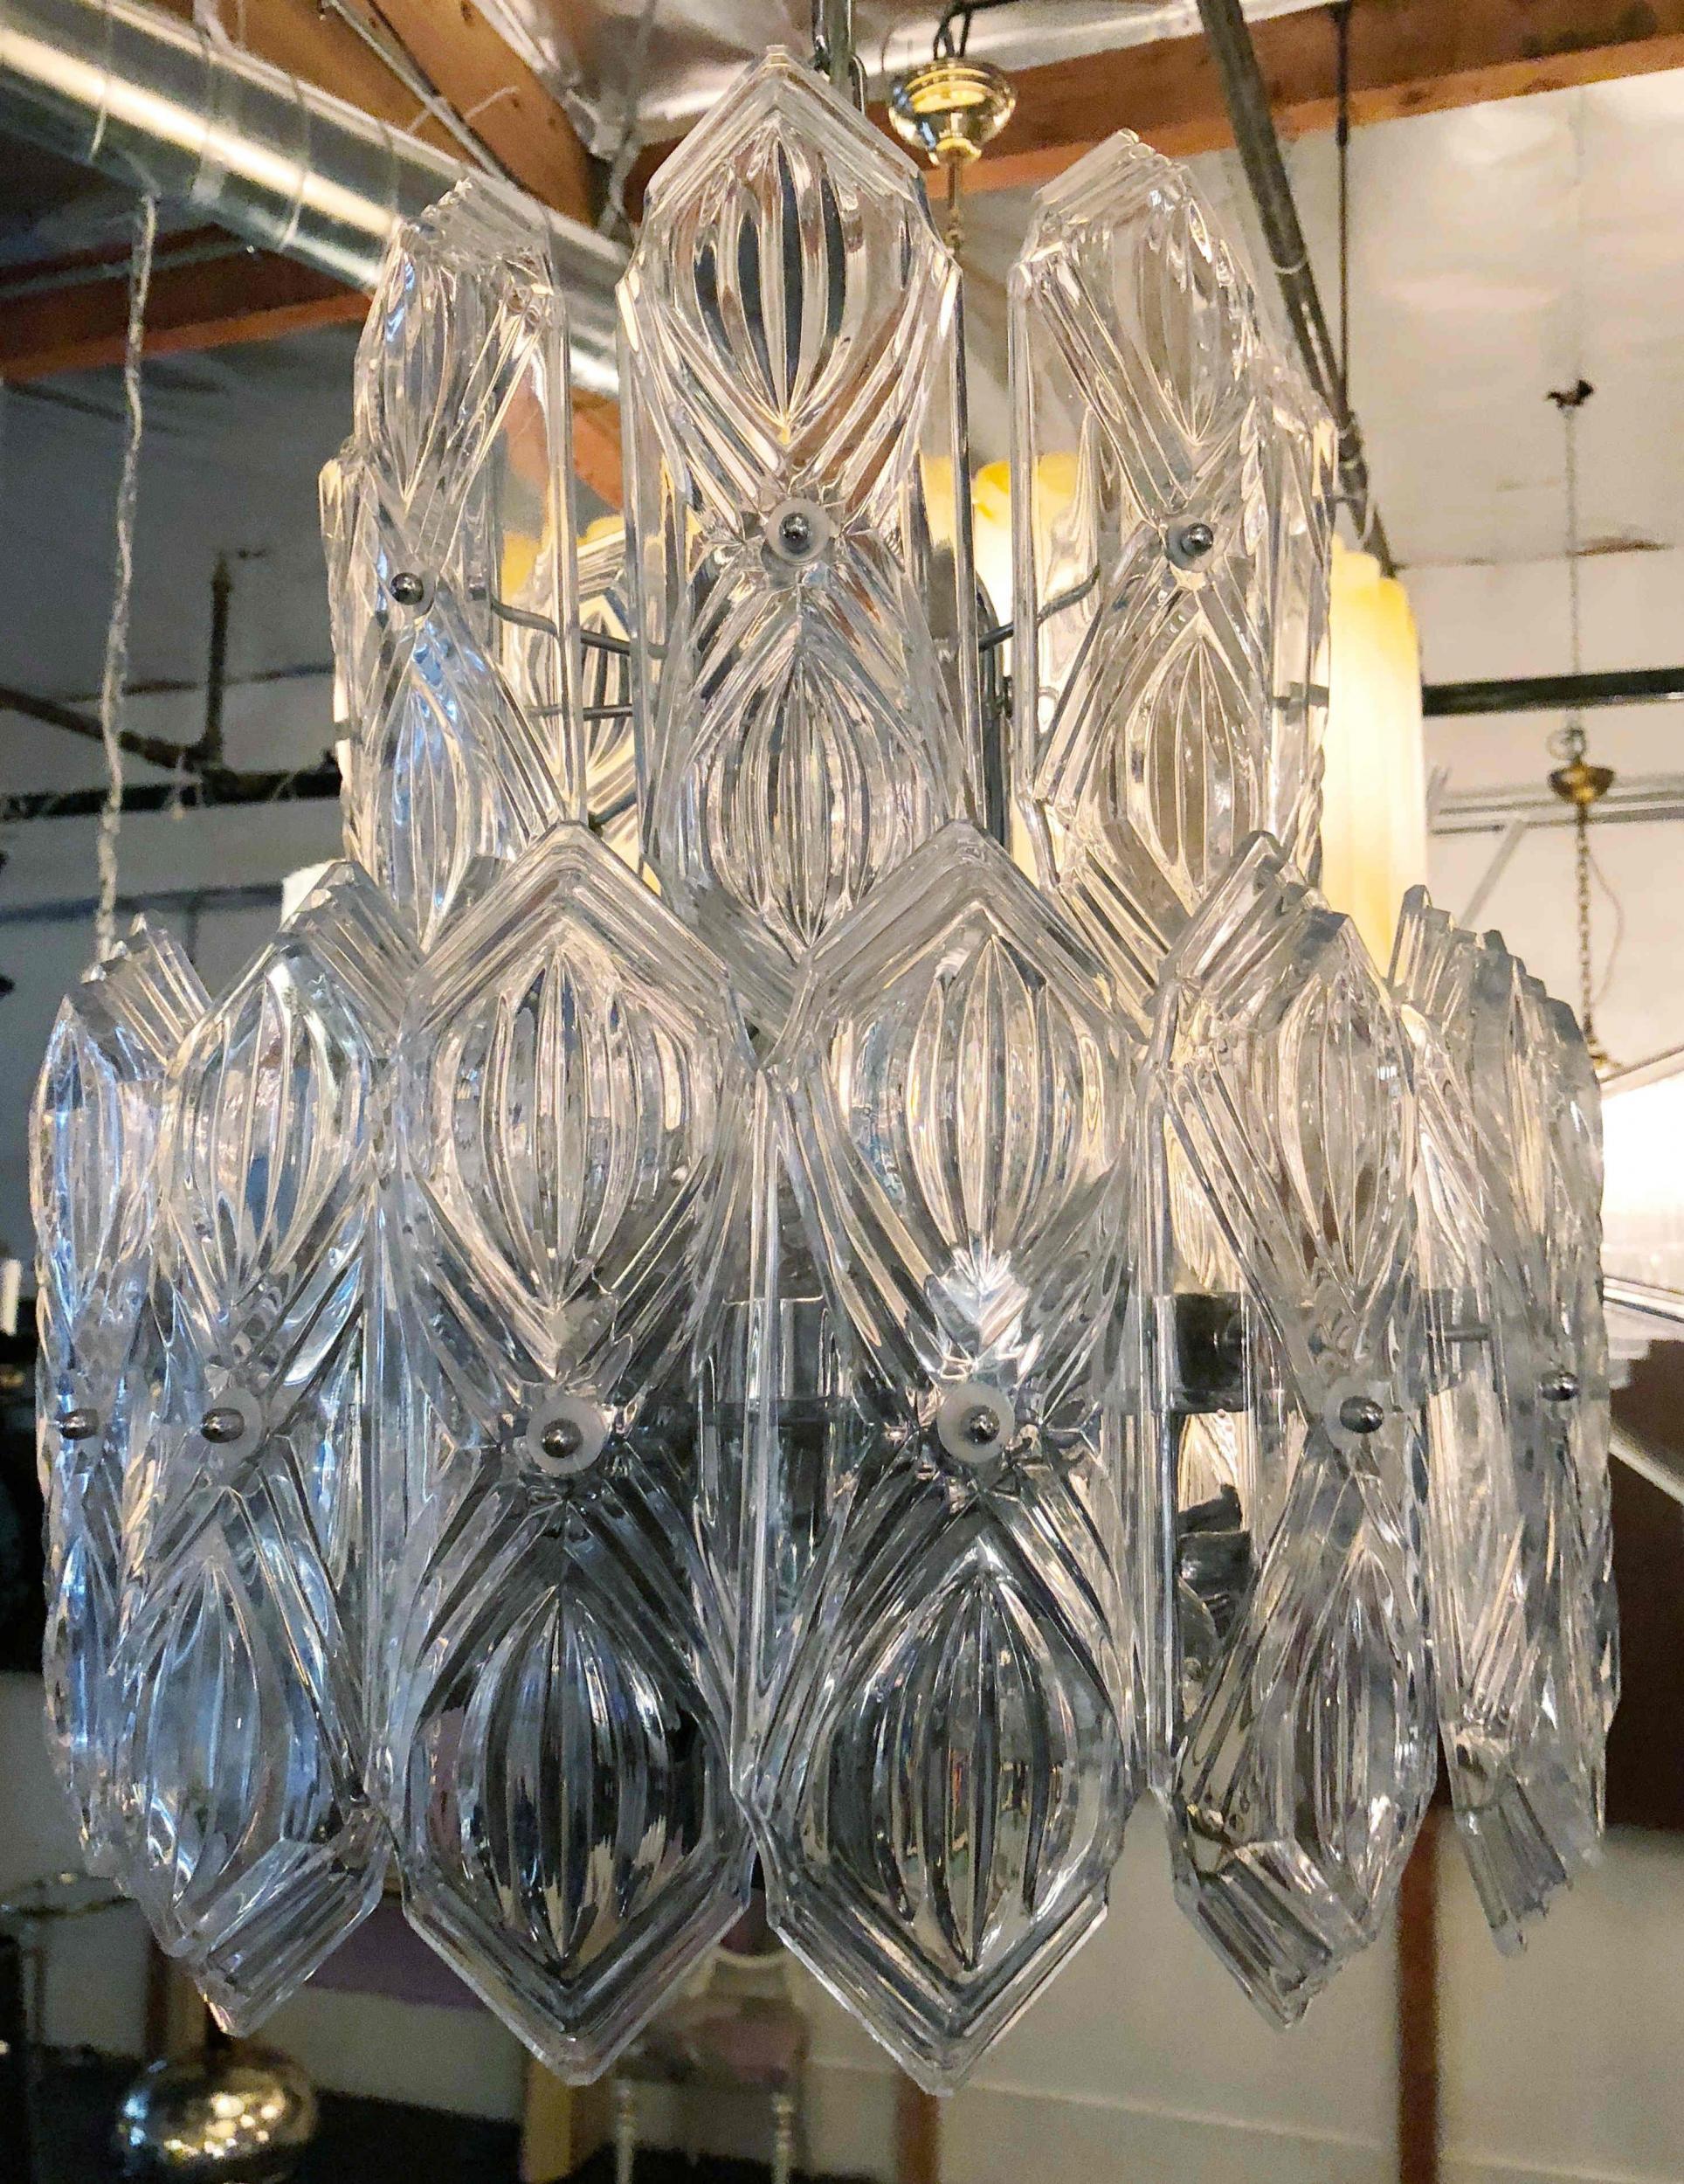 Mid-20th Century Art Deco Vintage Italian Chandelier, Clear Etched Glasses on Nickel, c 1960s For Sale